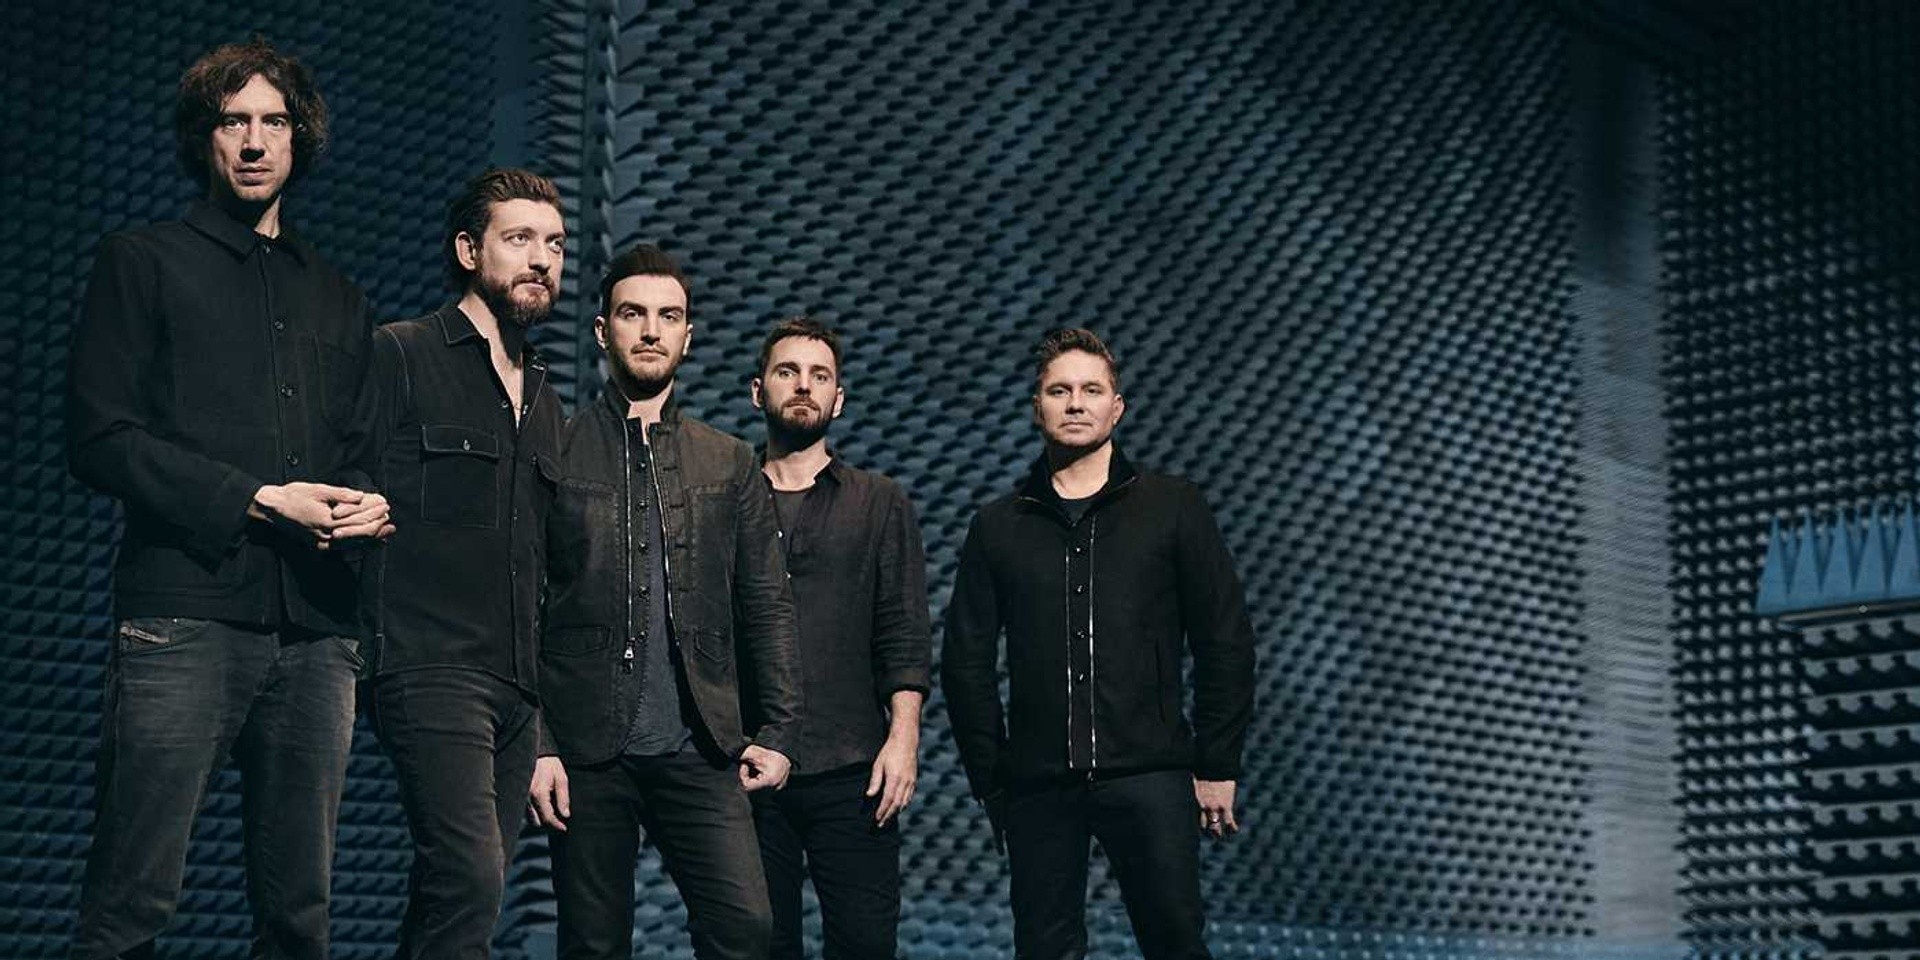 Snow Patrol to tour Asia this August – Shows in Singapore, Kuala Lumpur and Bangkok confirmed